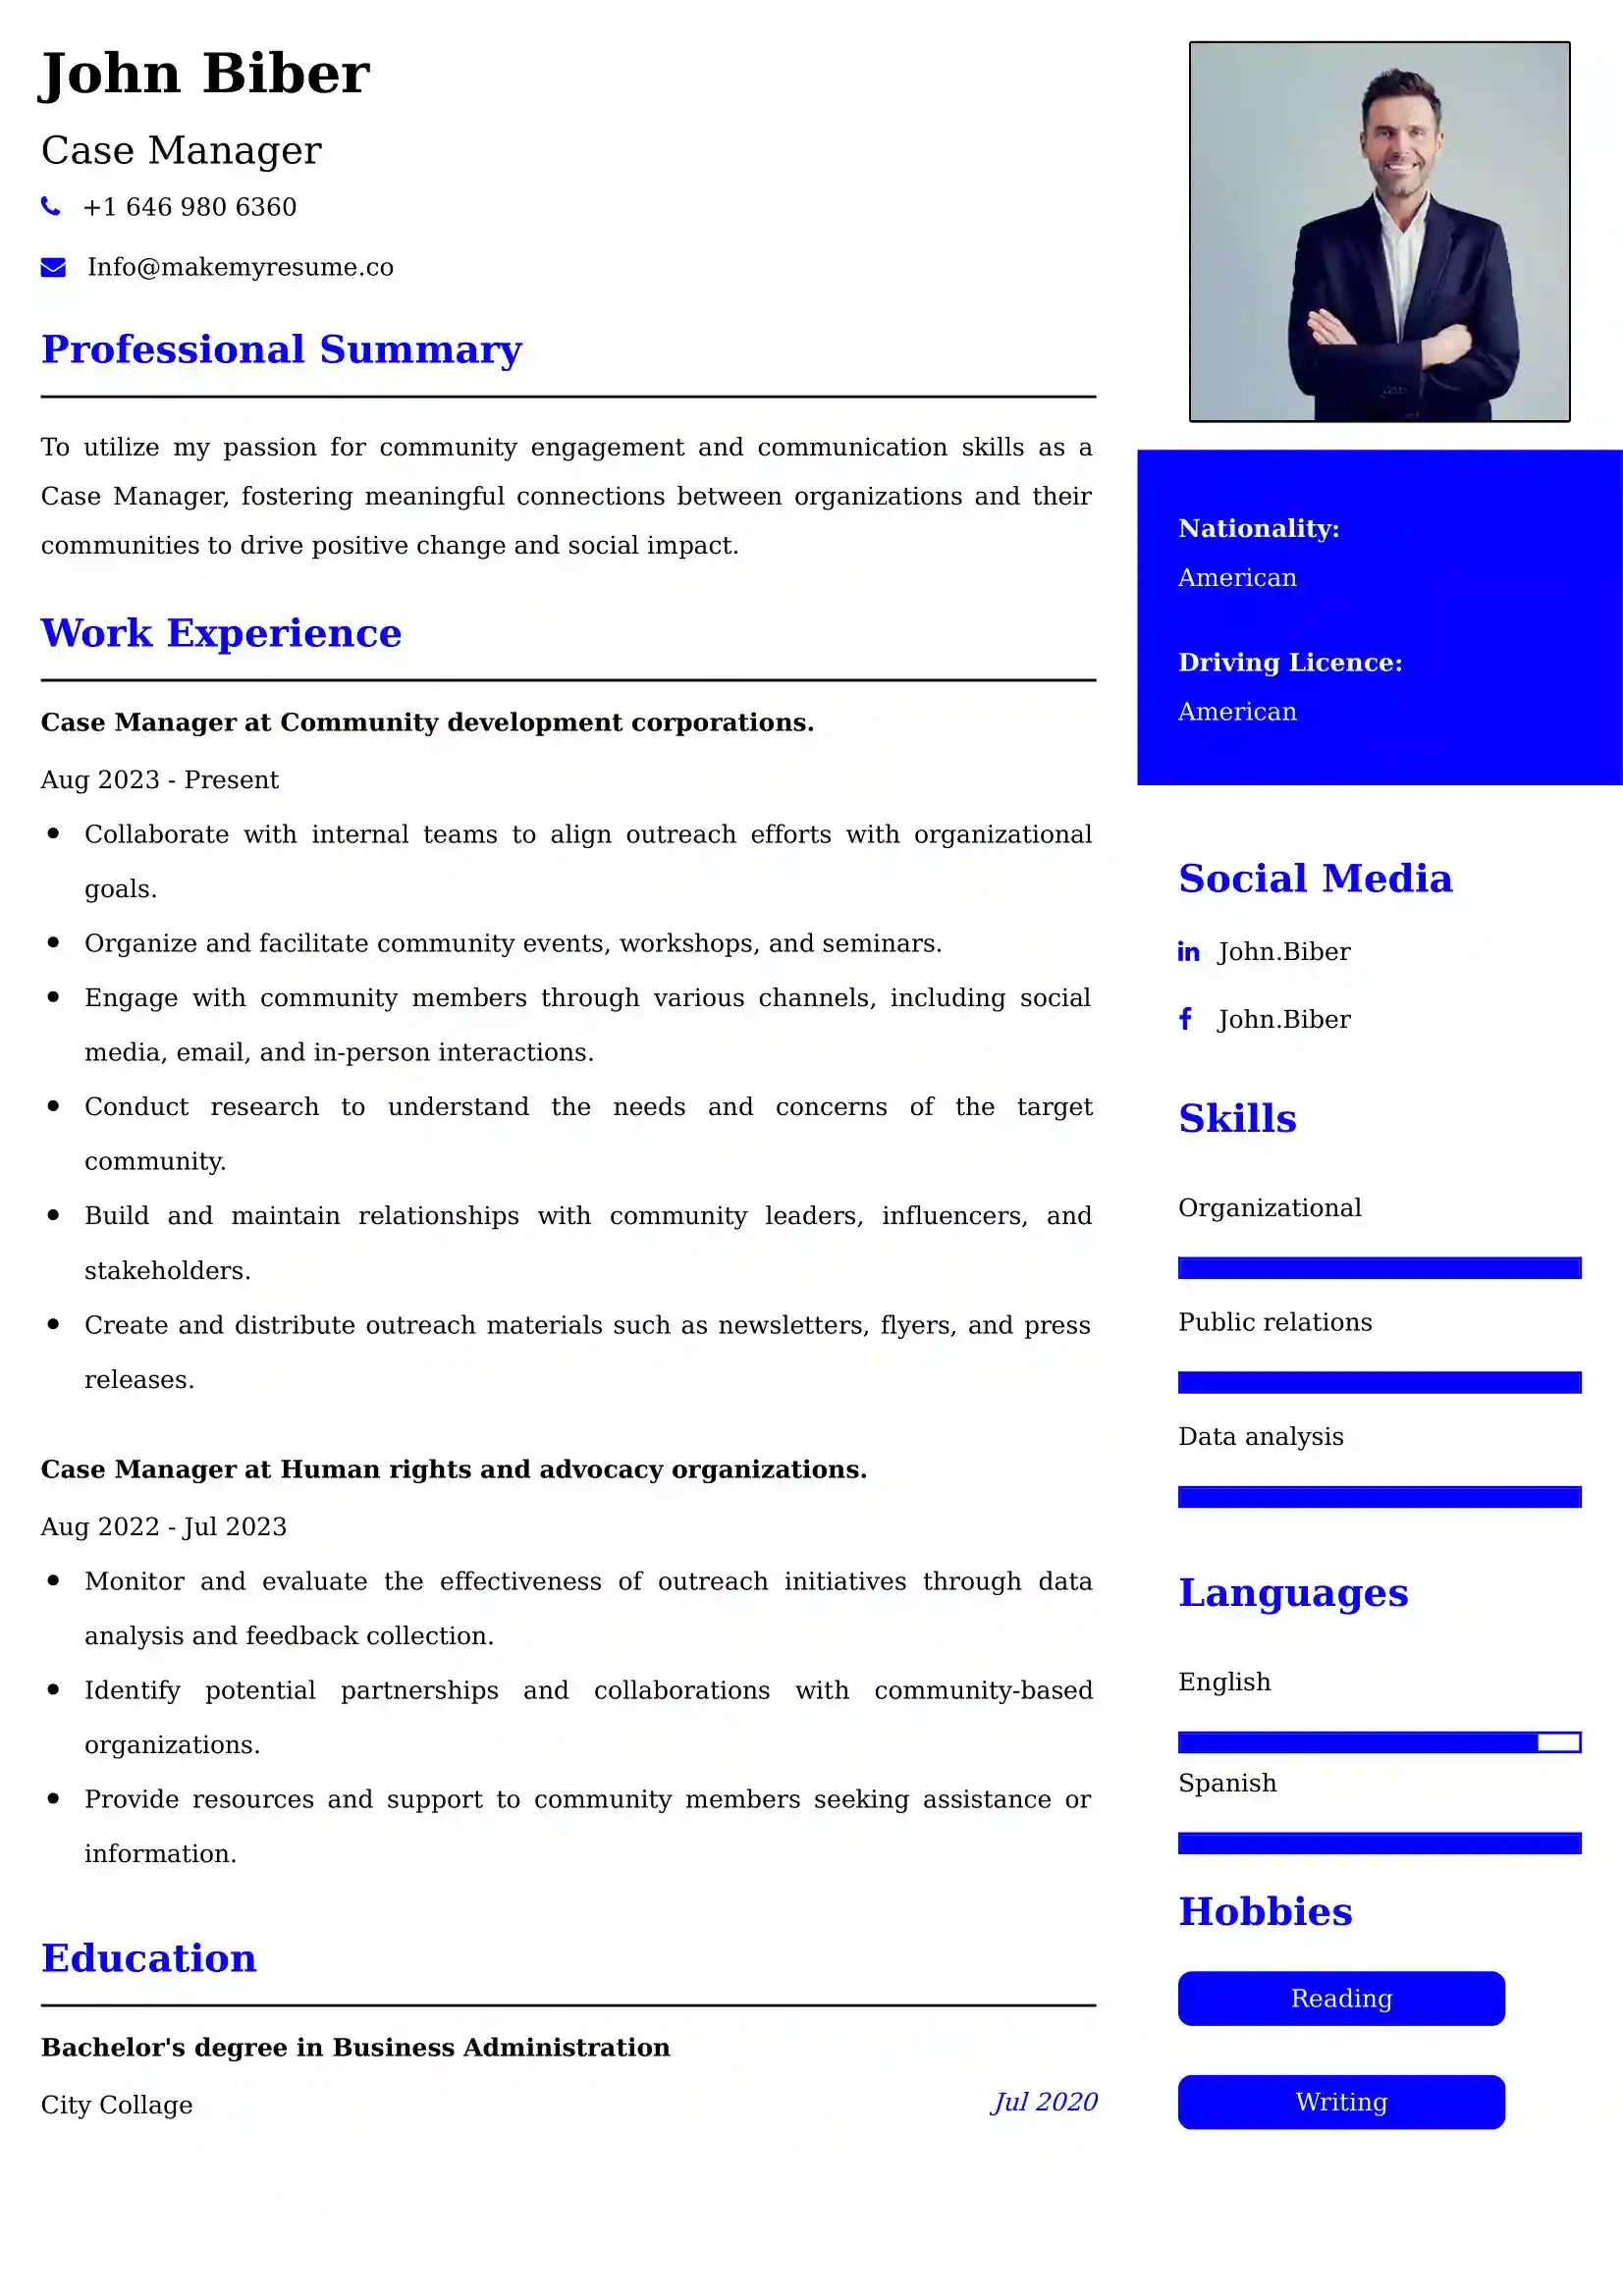 Case Manager Resume Examples for UK Jobs - Tips and Guide